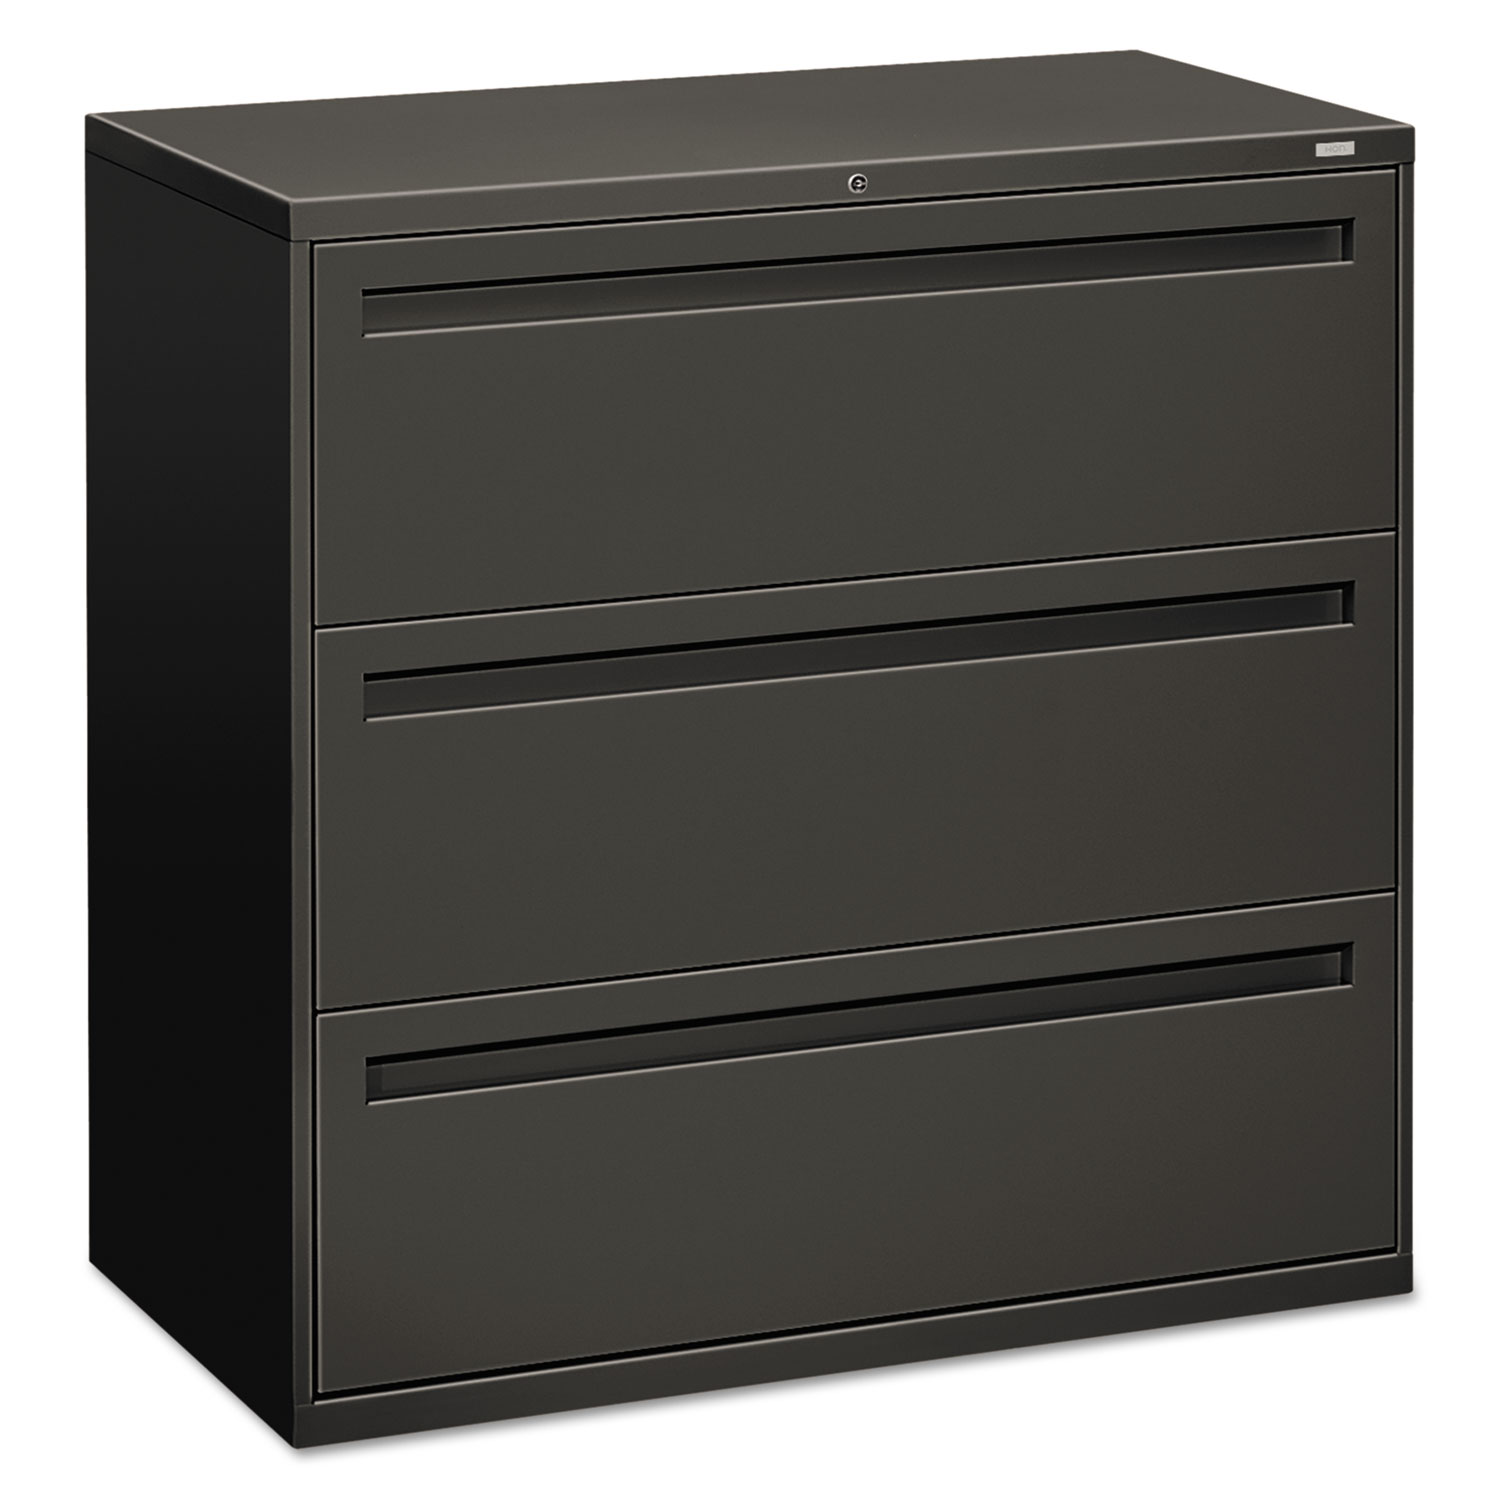 700 Series Three-Drawer Lateral File, 42w x 19-1/4d, Charcoal